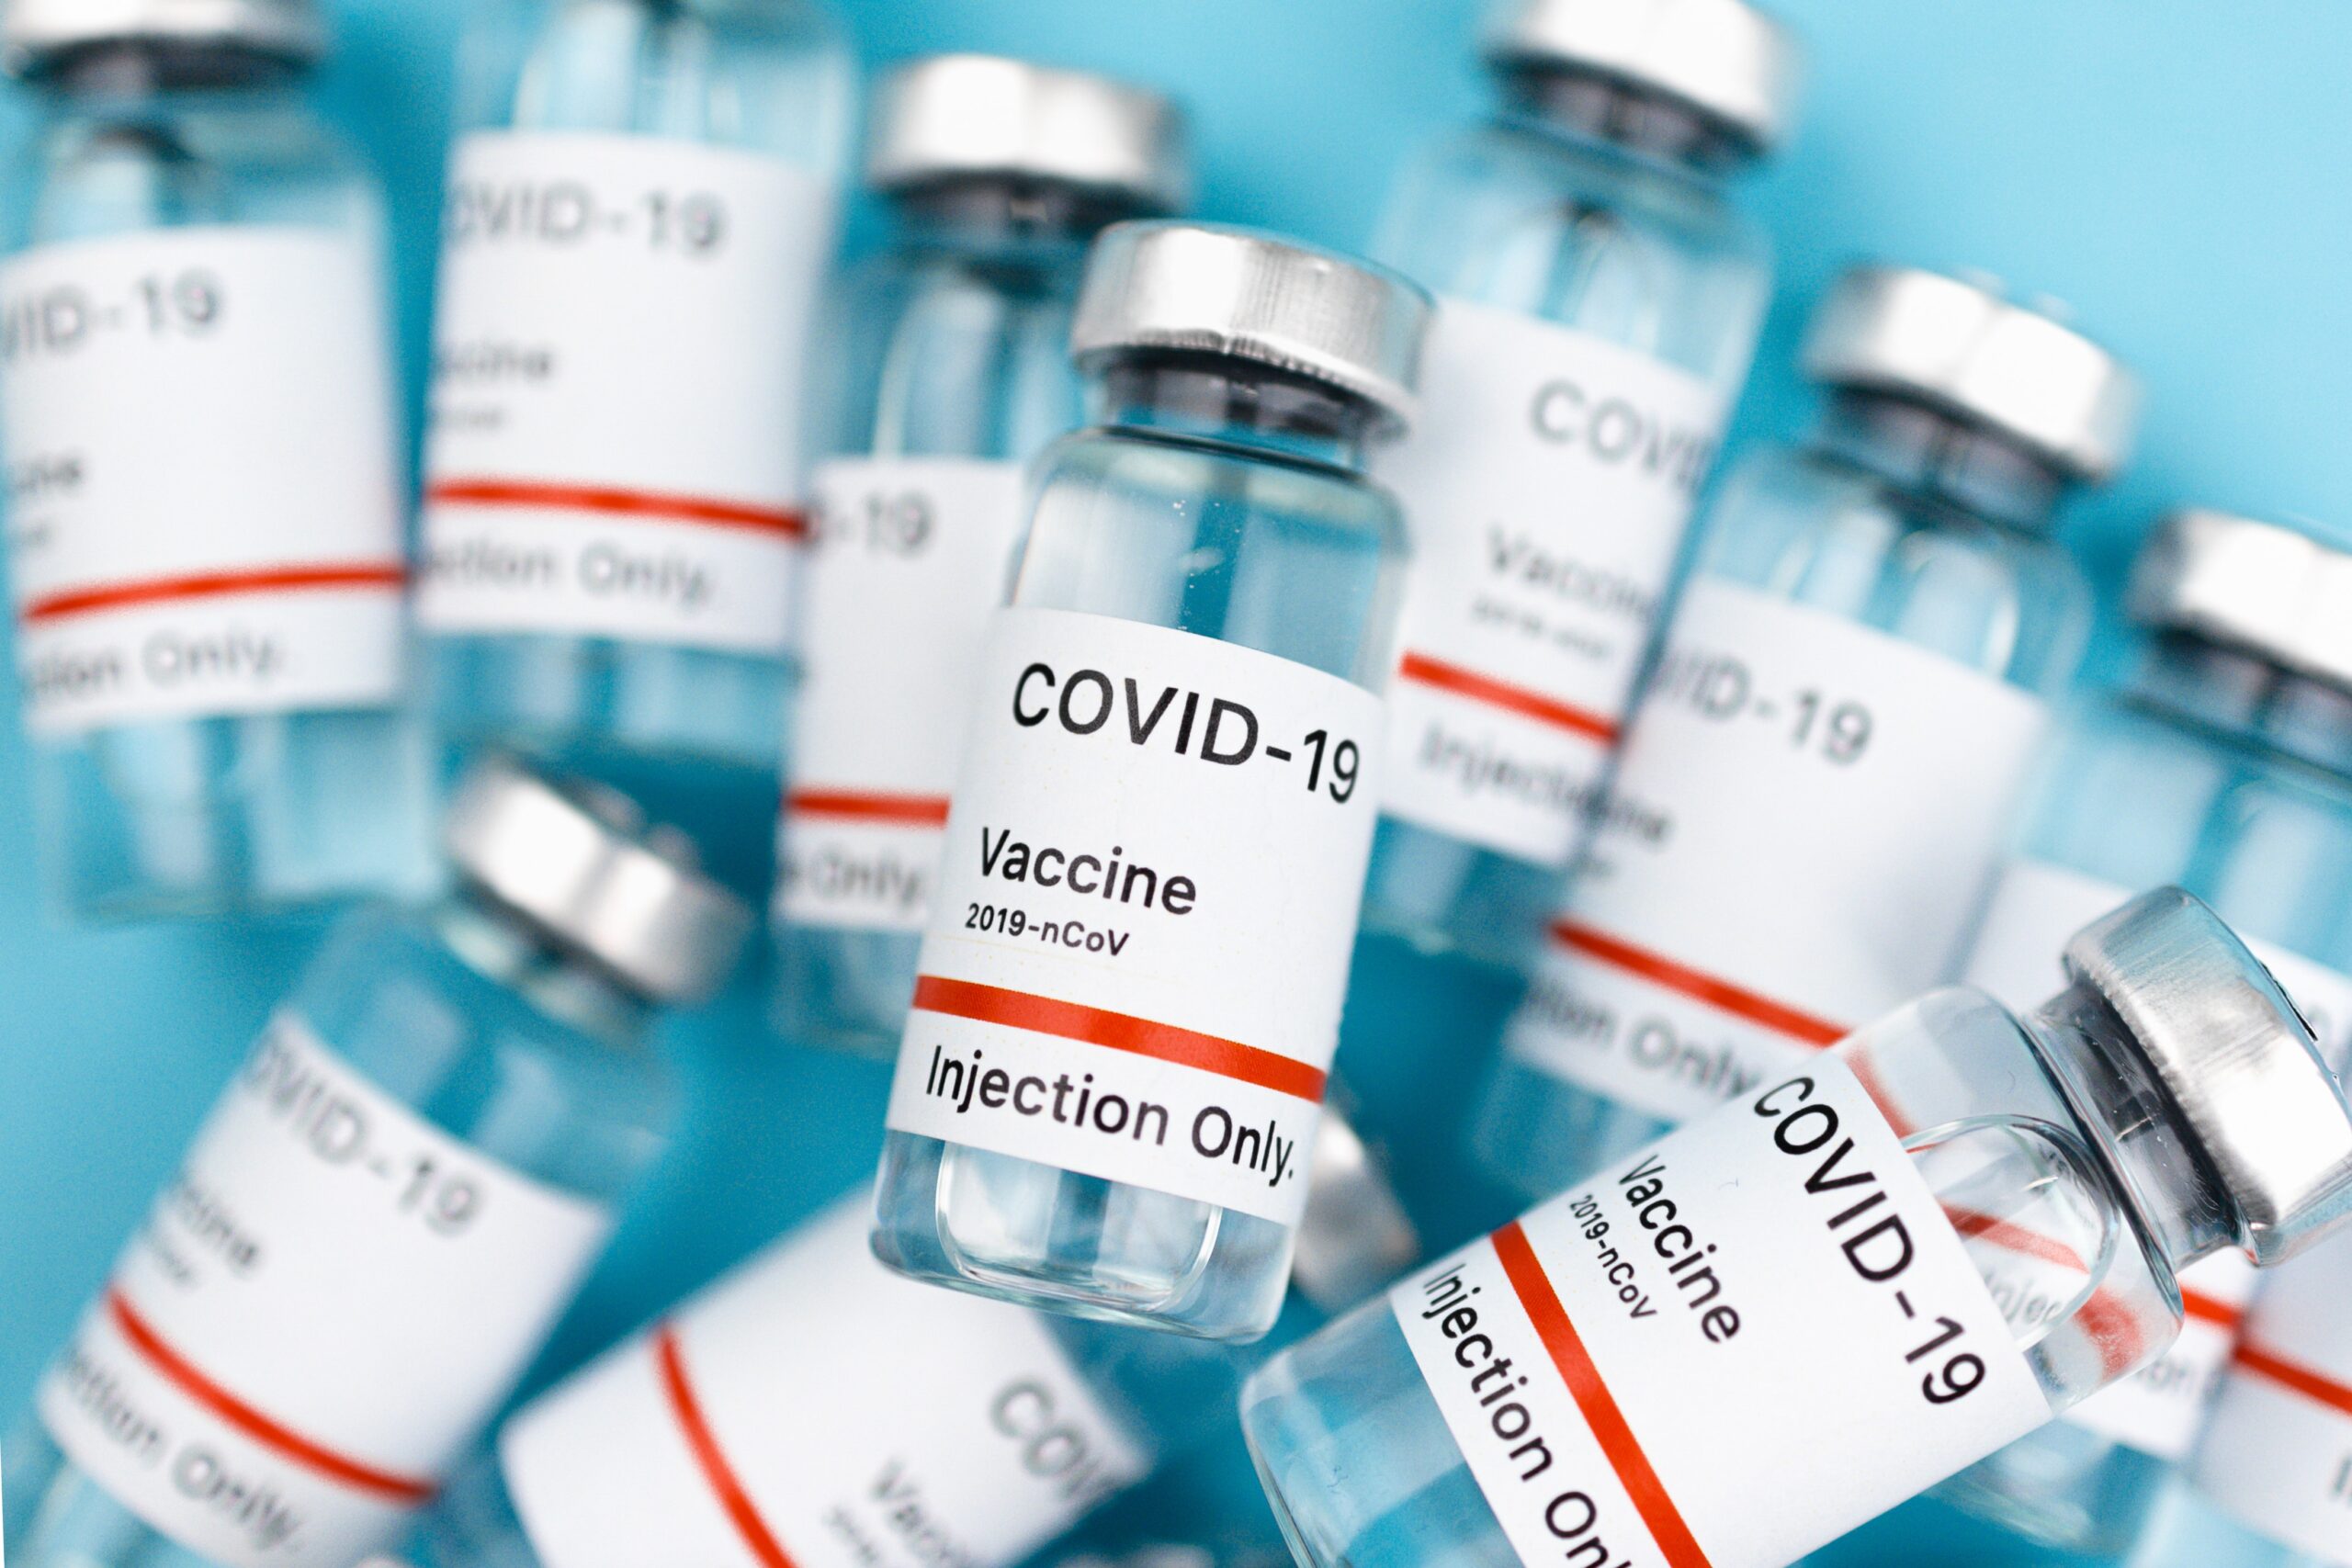 COVID-19 Vaccine international students must take before returning to China